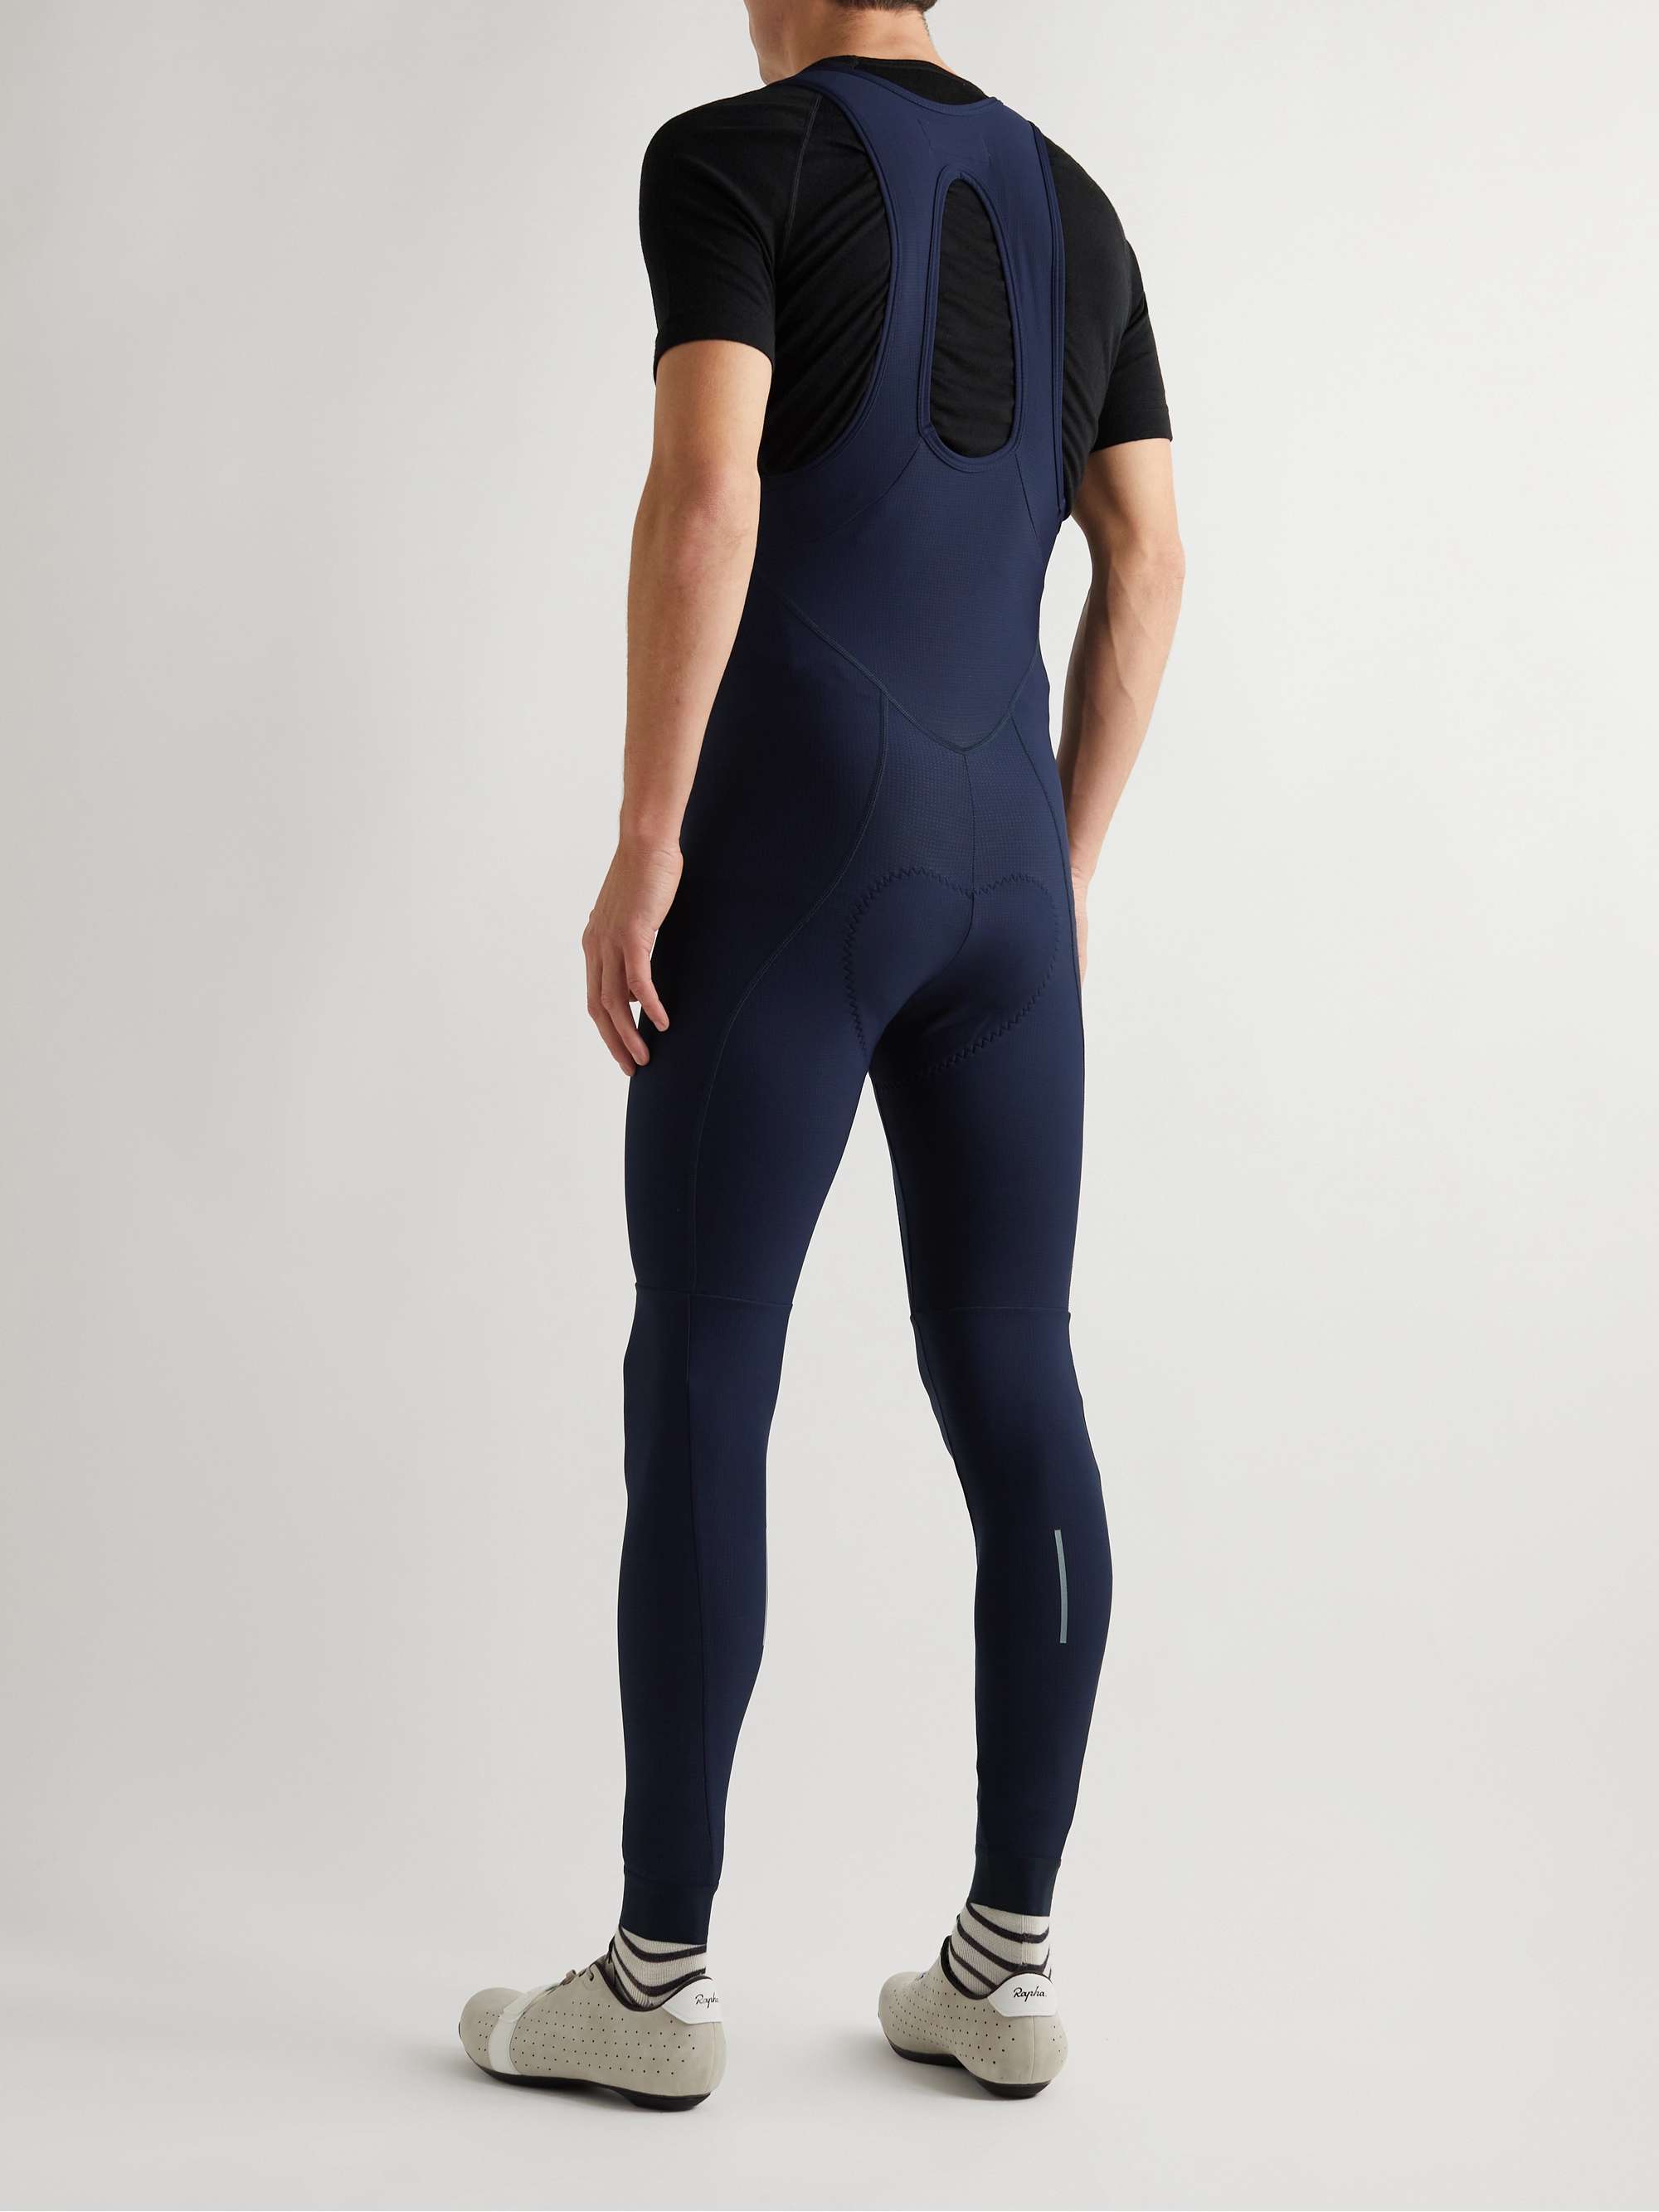 CAFE DU CYCLISTE Marie Mesh-Panelled Jersey Cycling Bib Tights